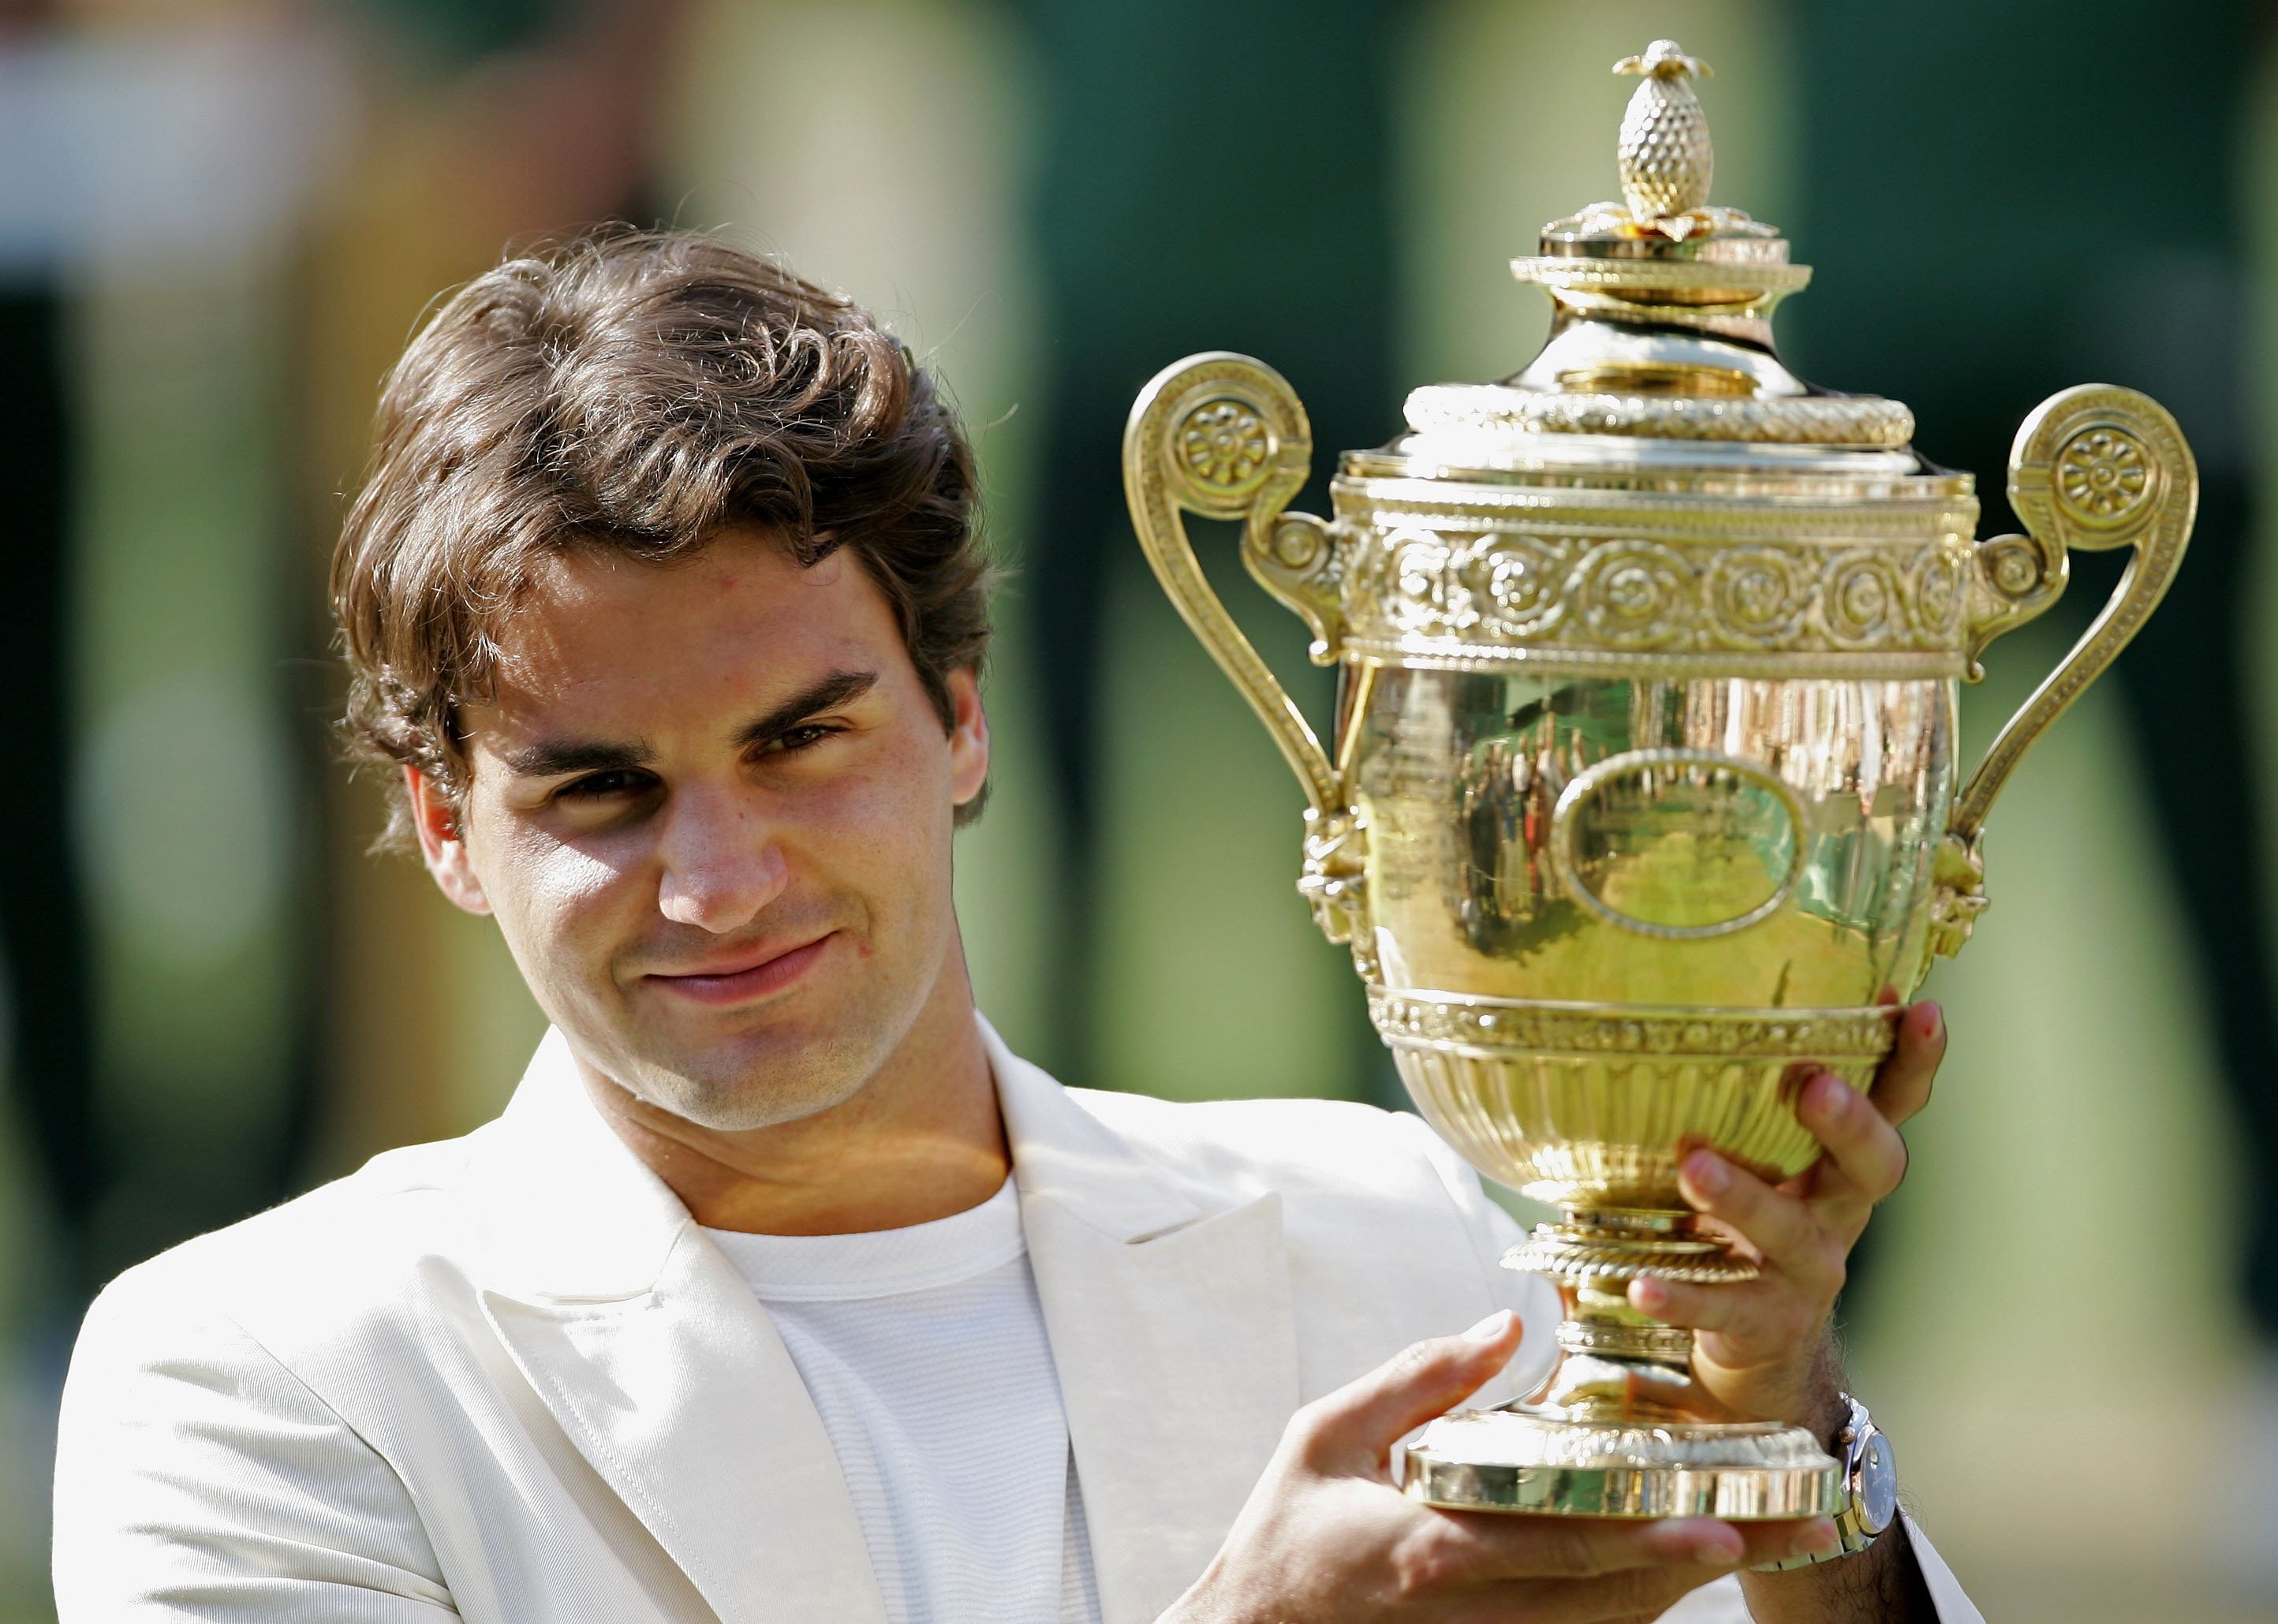 Roger Federer holds the trophy after winning the 2006 Wimbledon Lawn Tennis Championship.